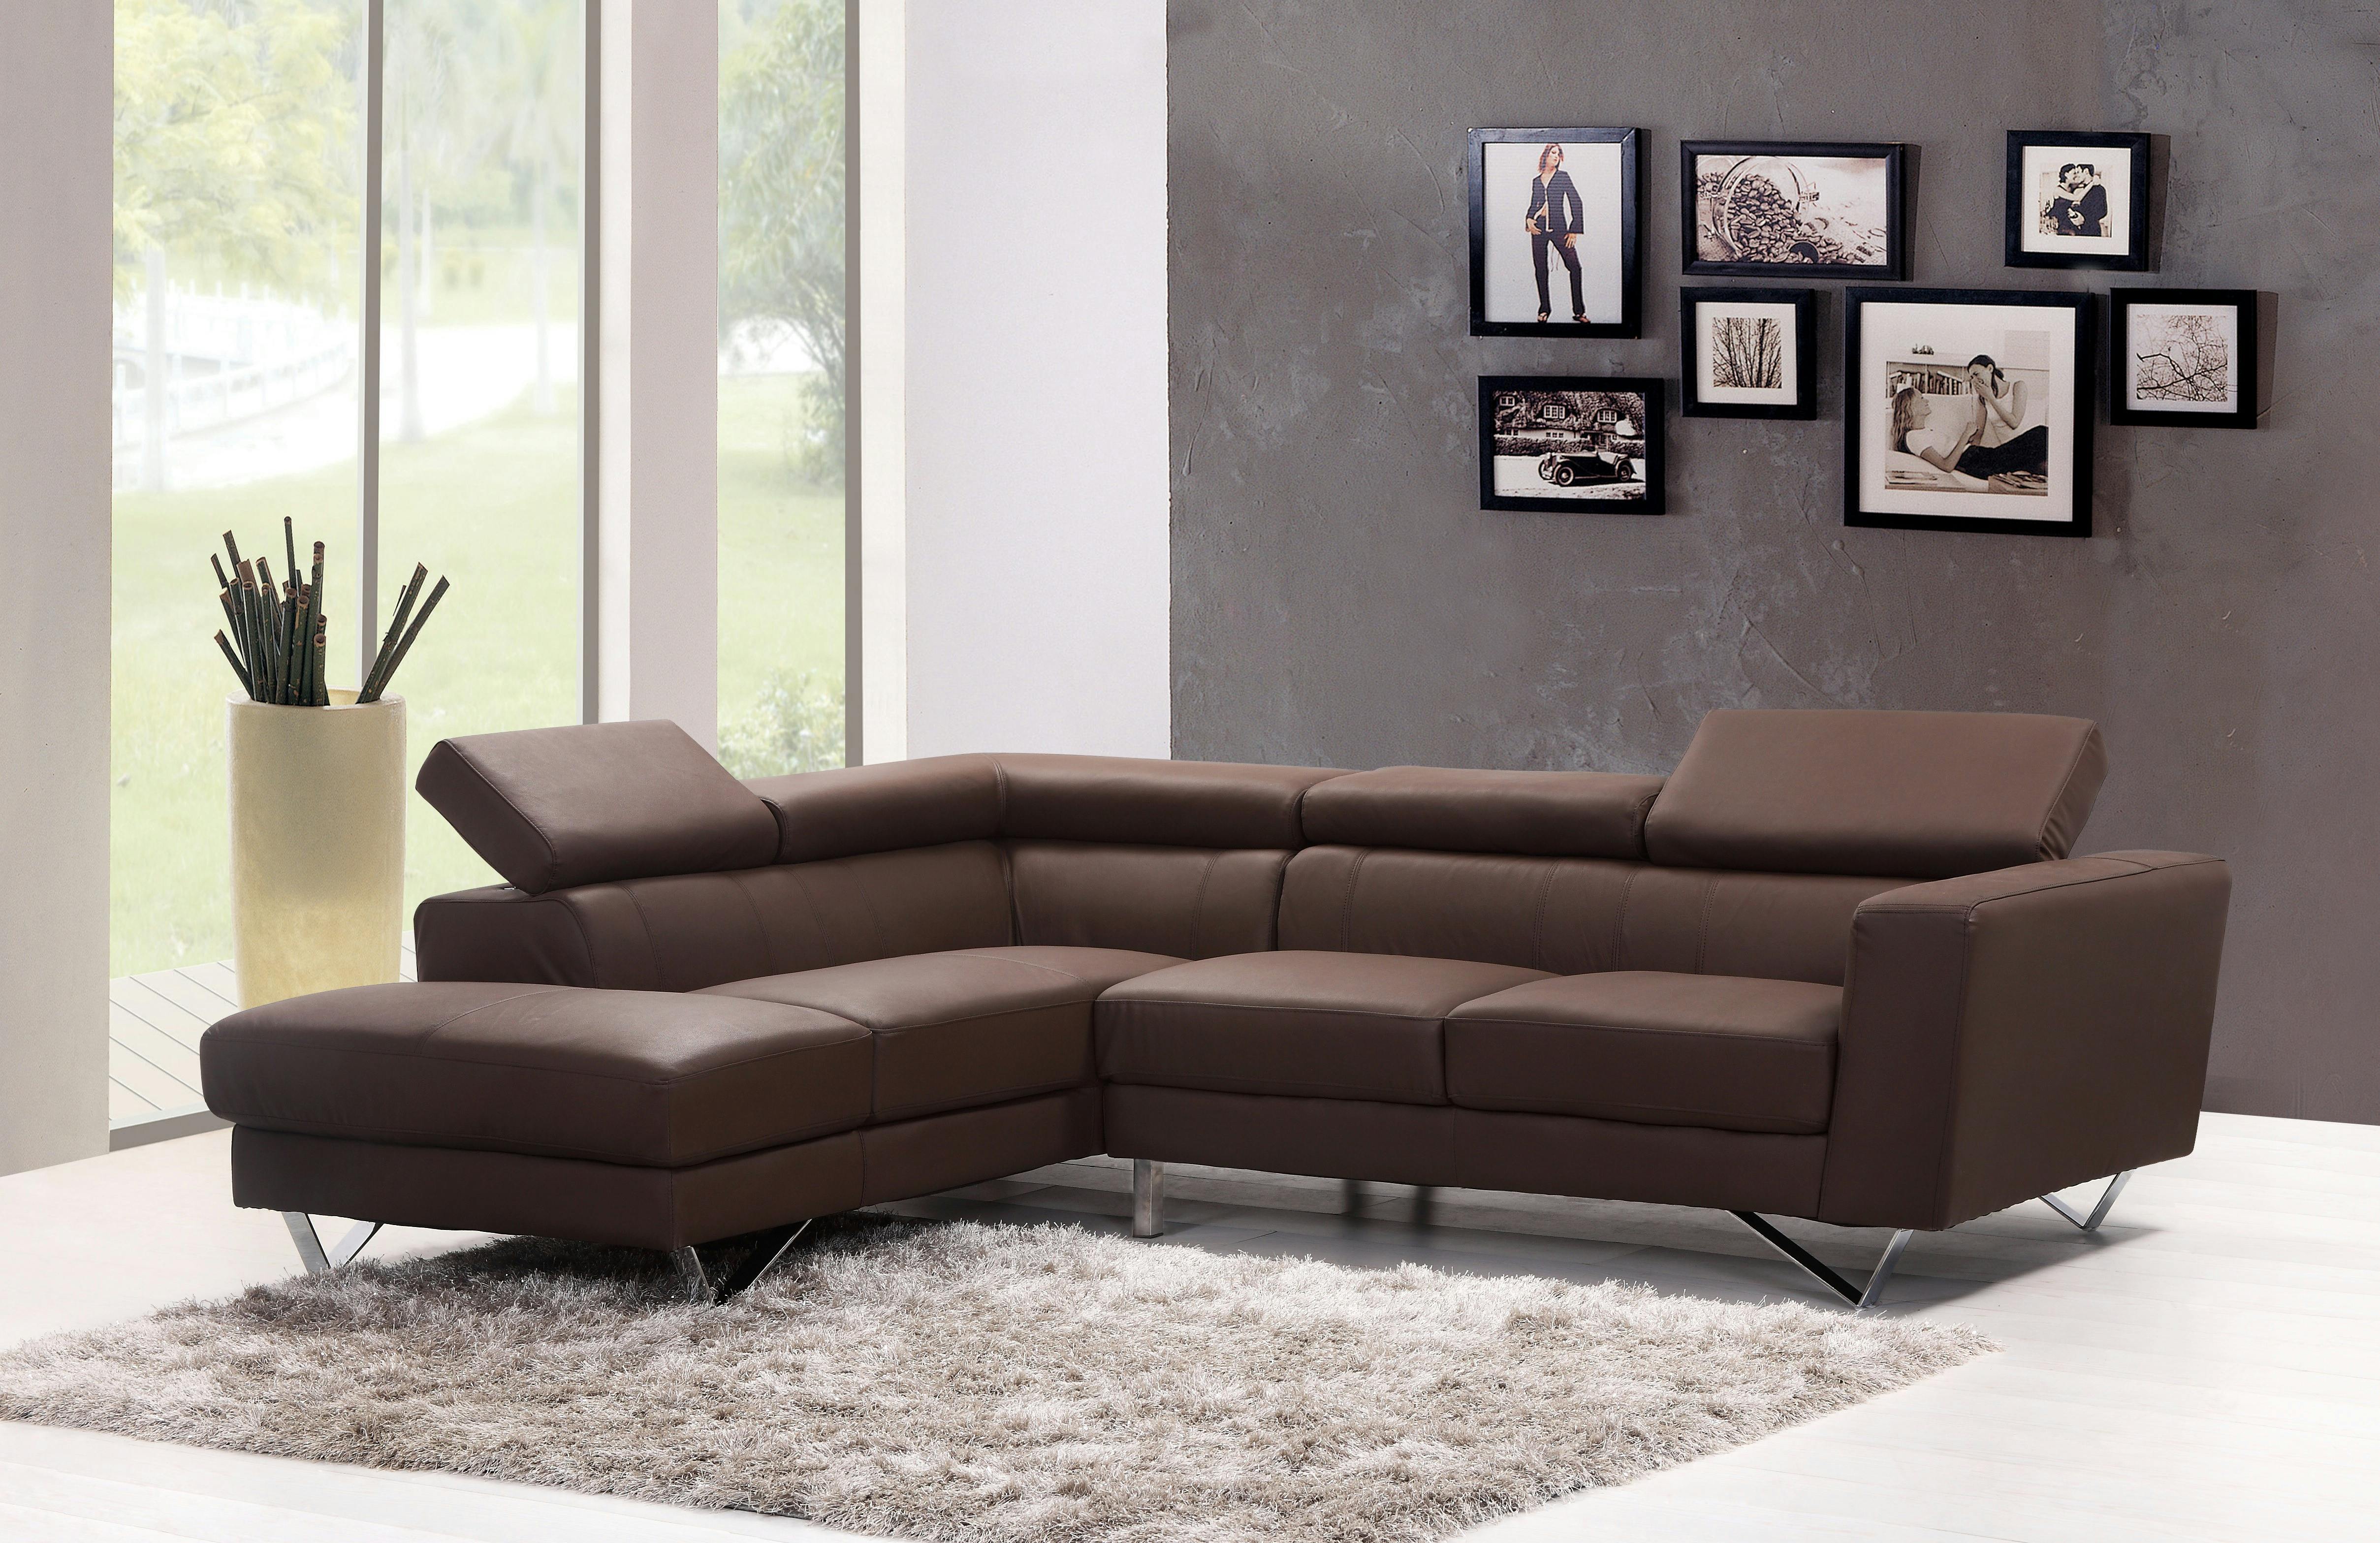 Sofa Photos, Download The BEST Free Sofa Stock Photos & HD Images